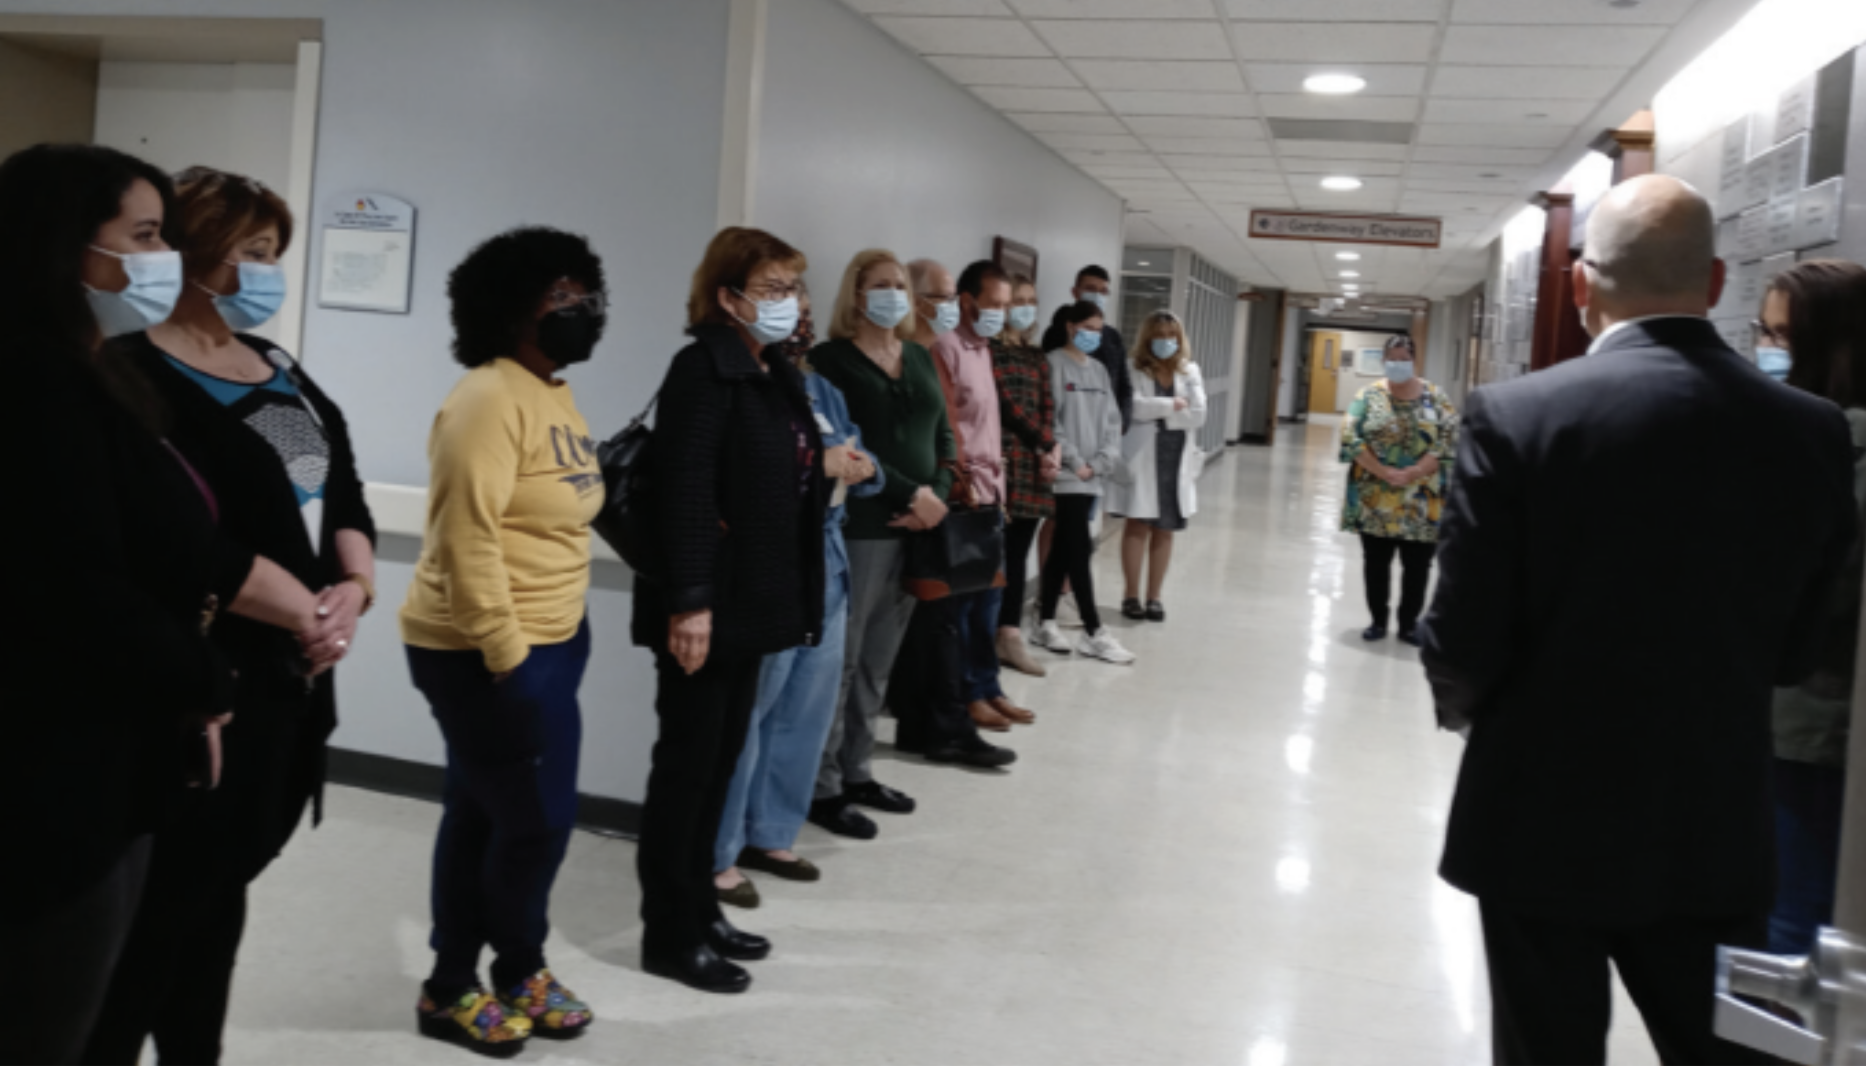 People Stand in Hallway to see chapel tile reveal